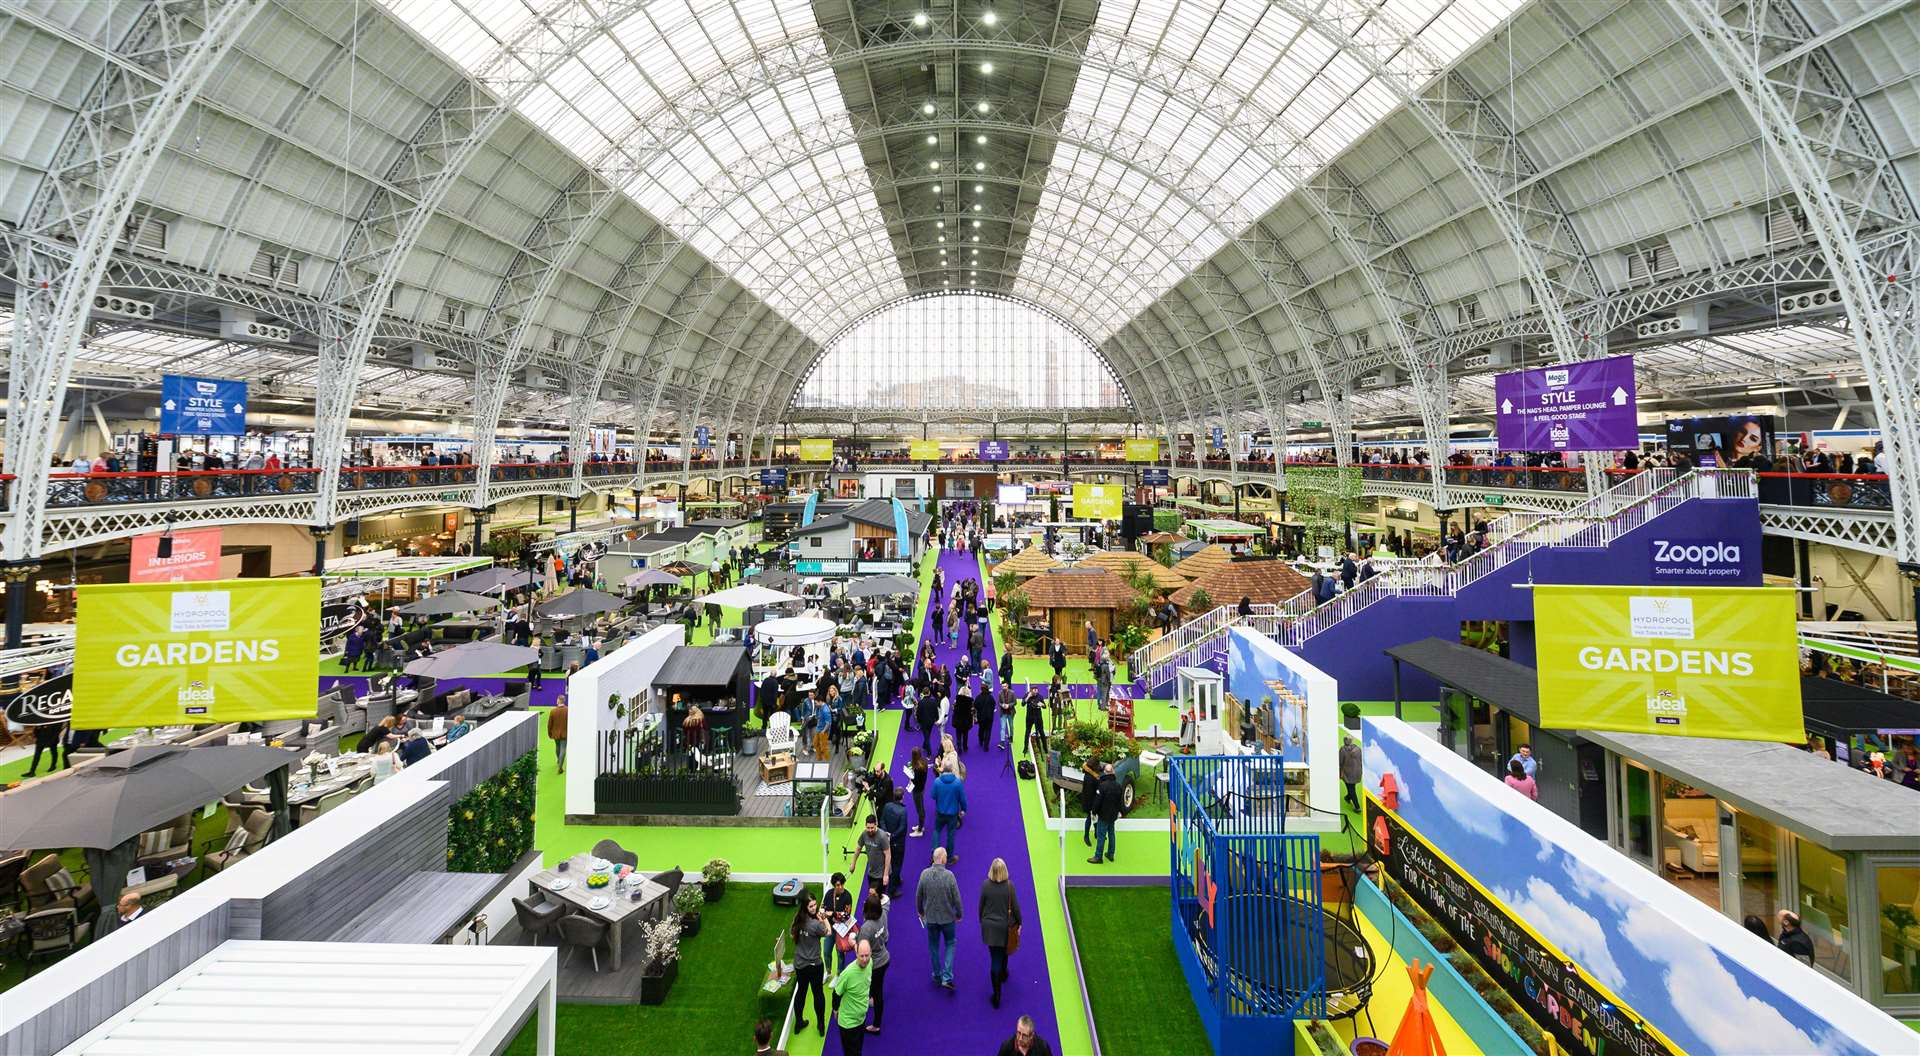 The Ideal Home Show is the world's longest running exhibition!